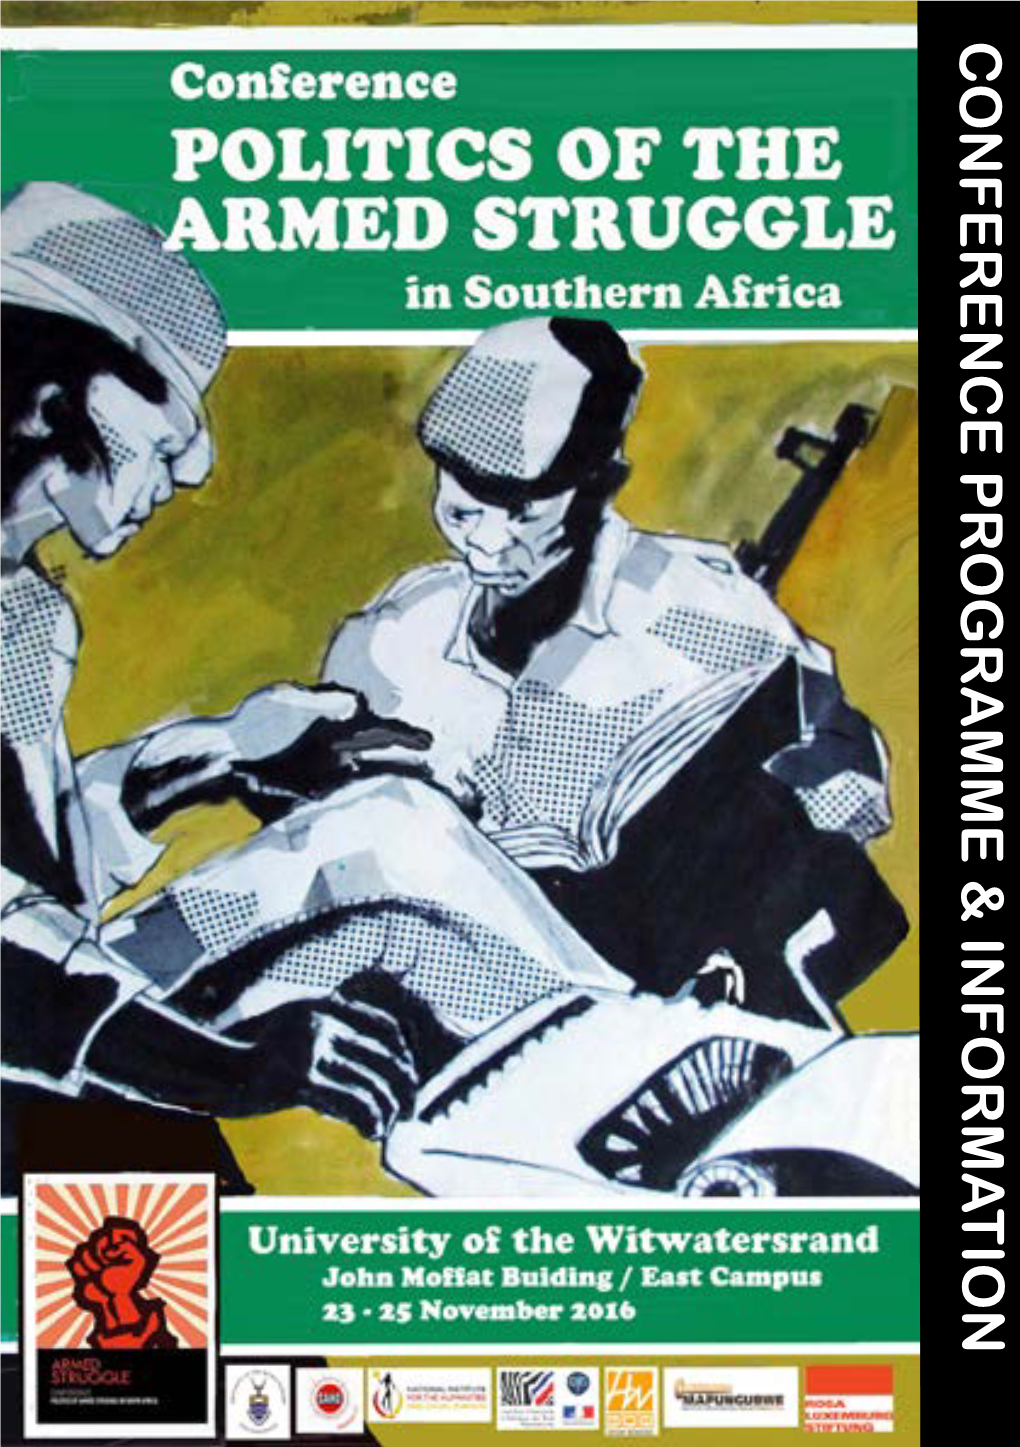 Conference Programme & Information the Politics of Armed Struggle in Southern Africa